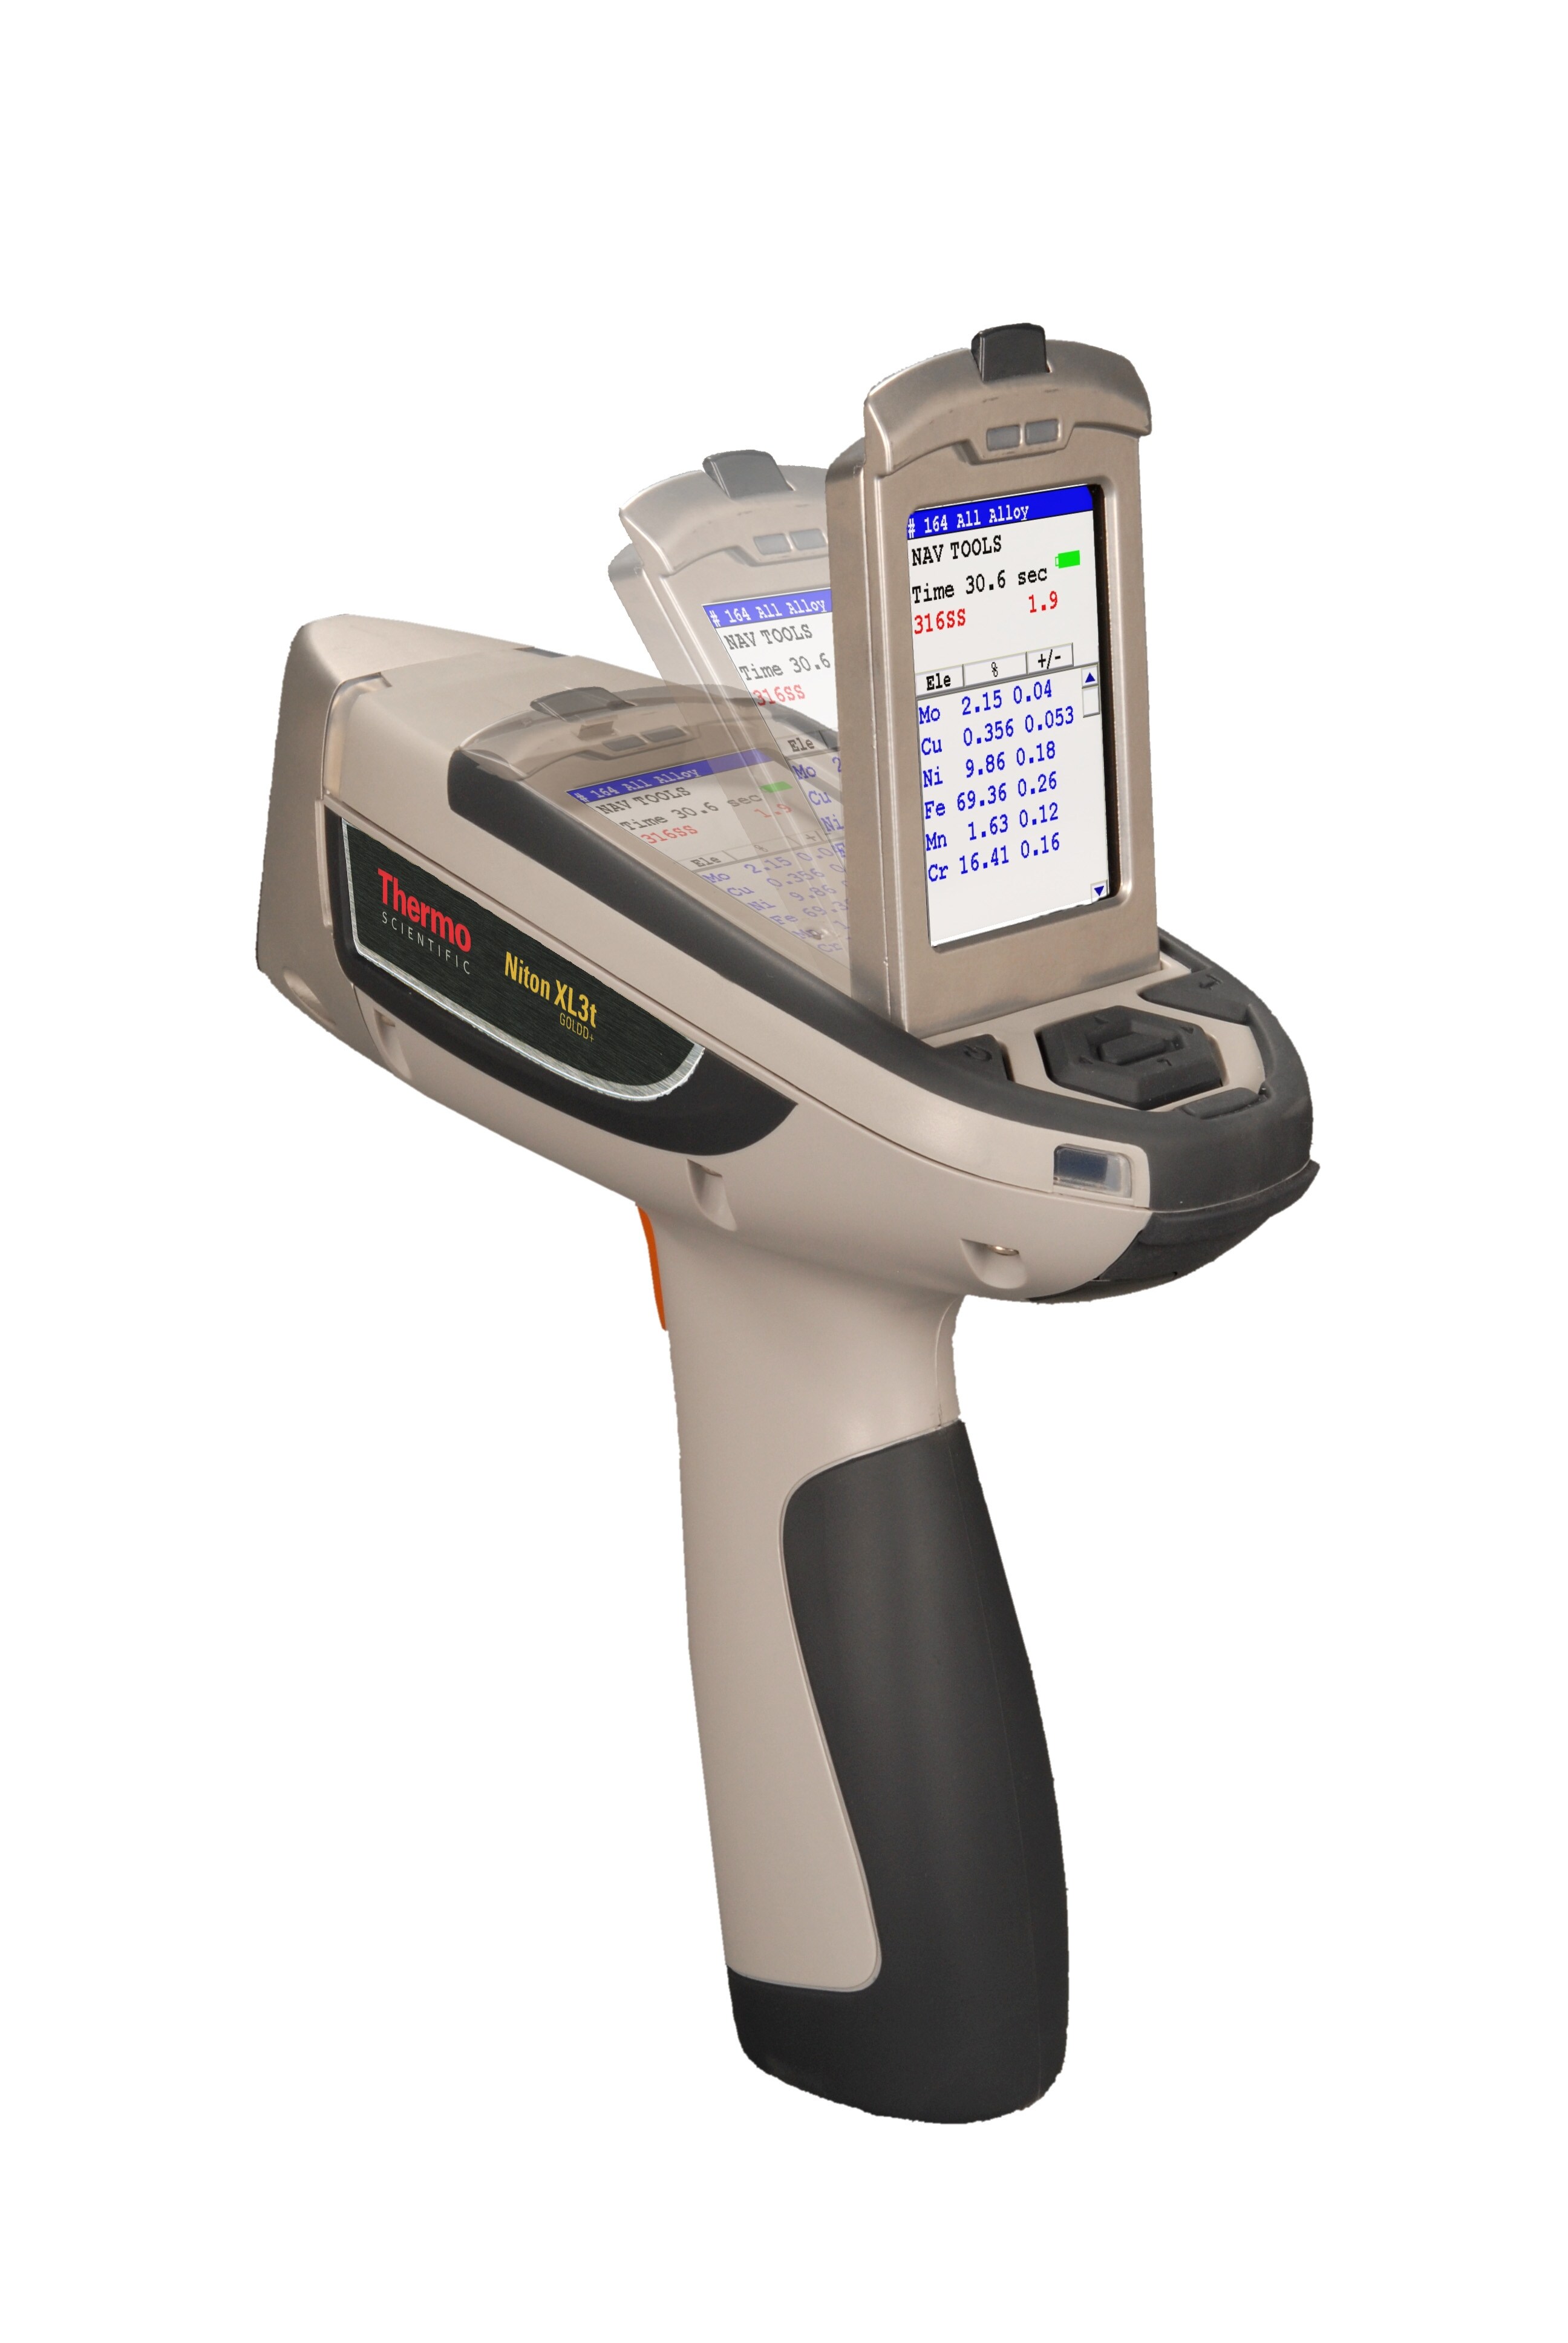 The Pre-Owned Analyzers Collection — The XRF Company